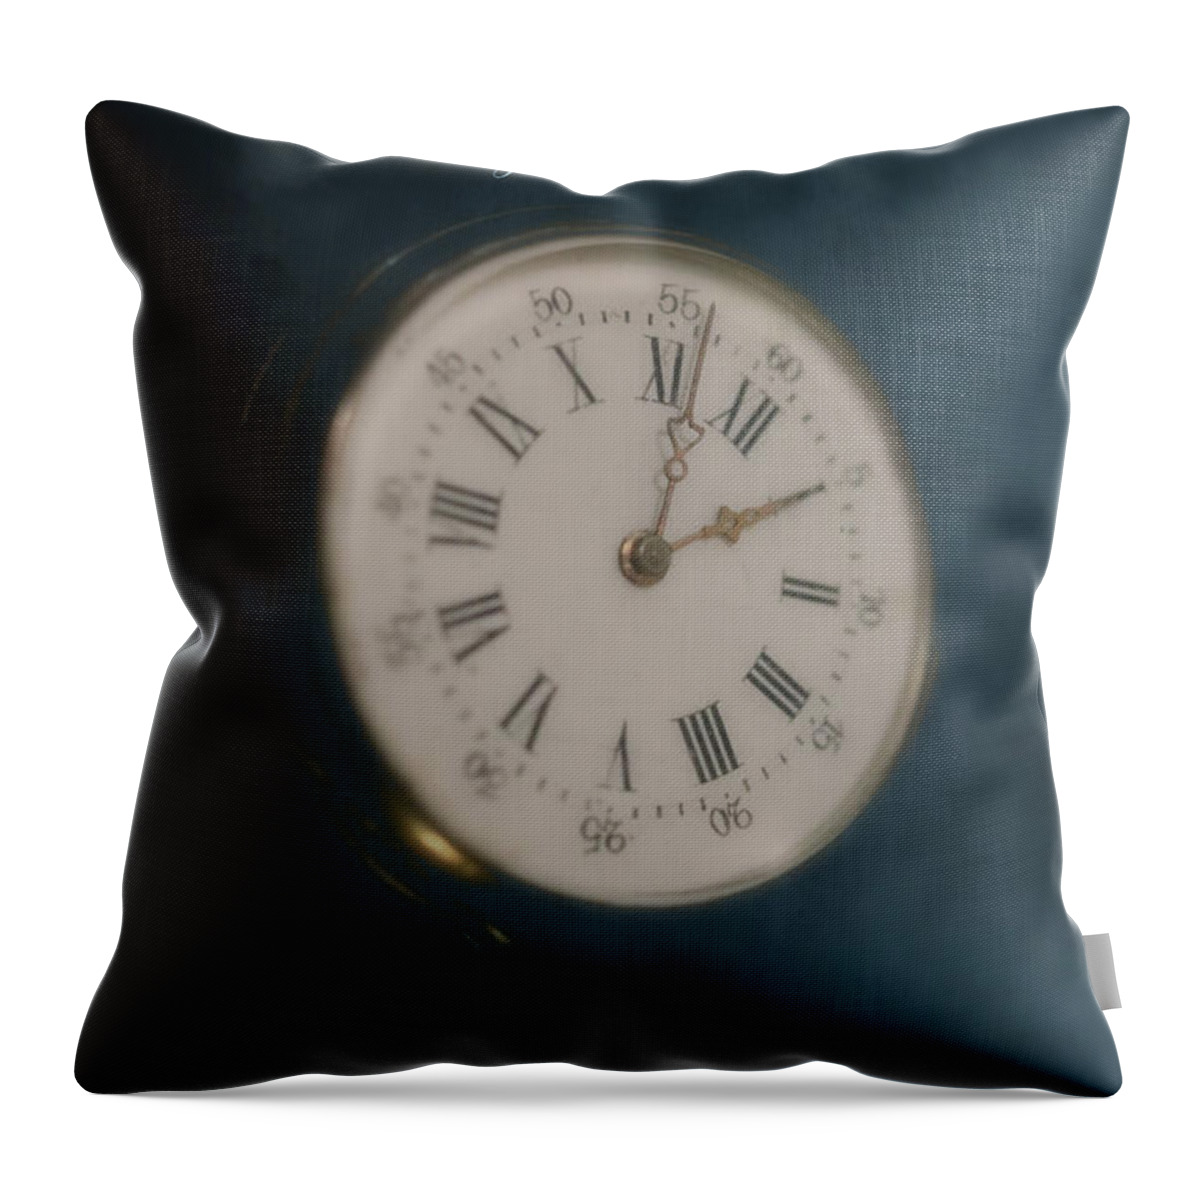 Old Throw Pillow featuring the photograph Old Times Good Times by Johanna Hurmerinta